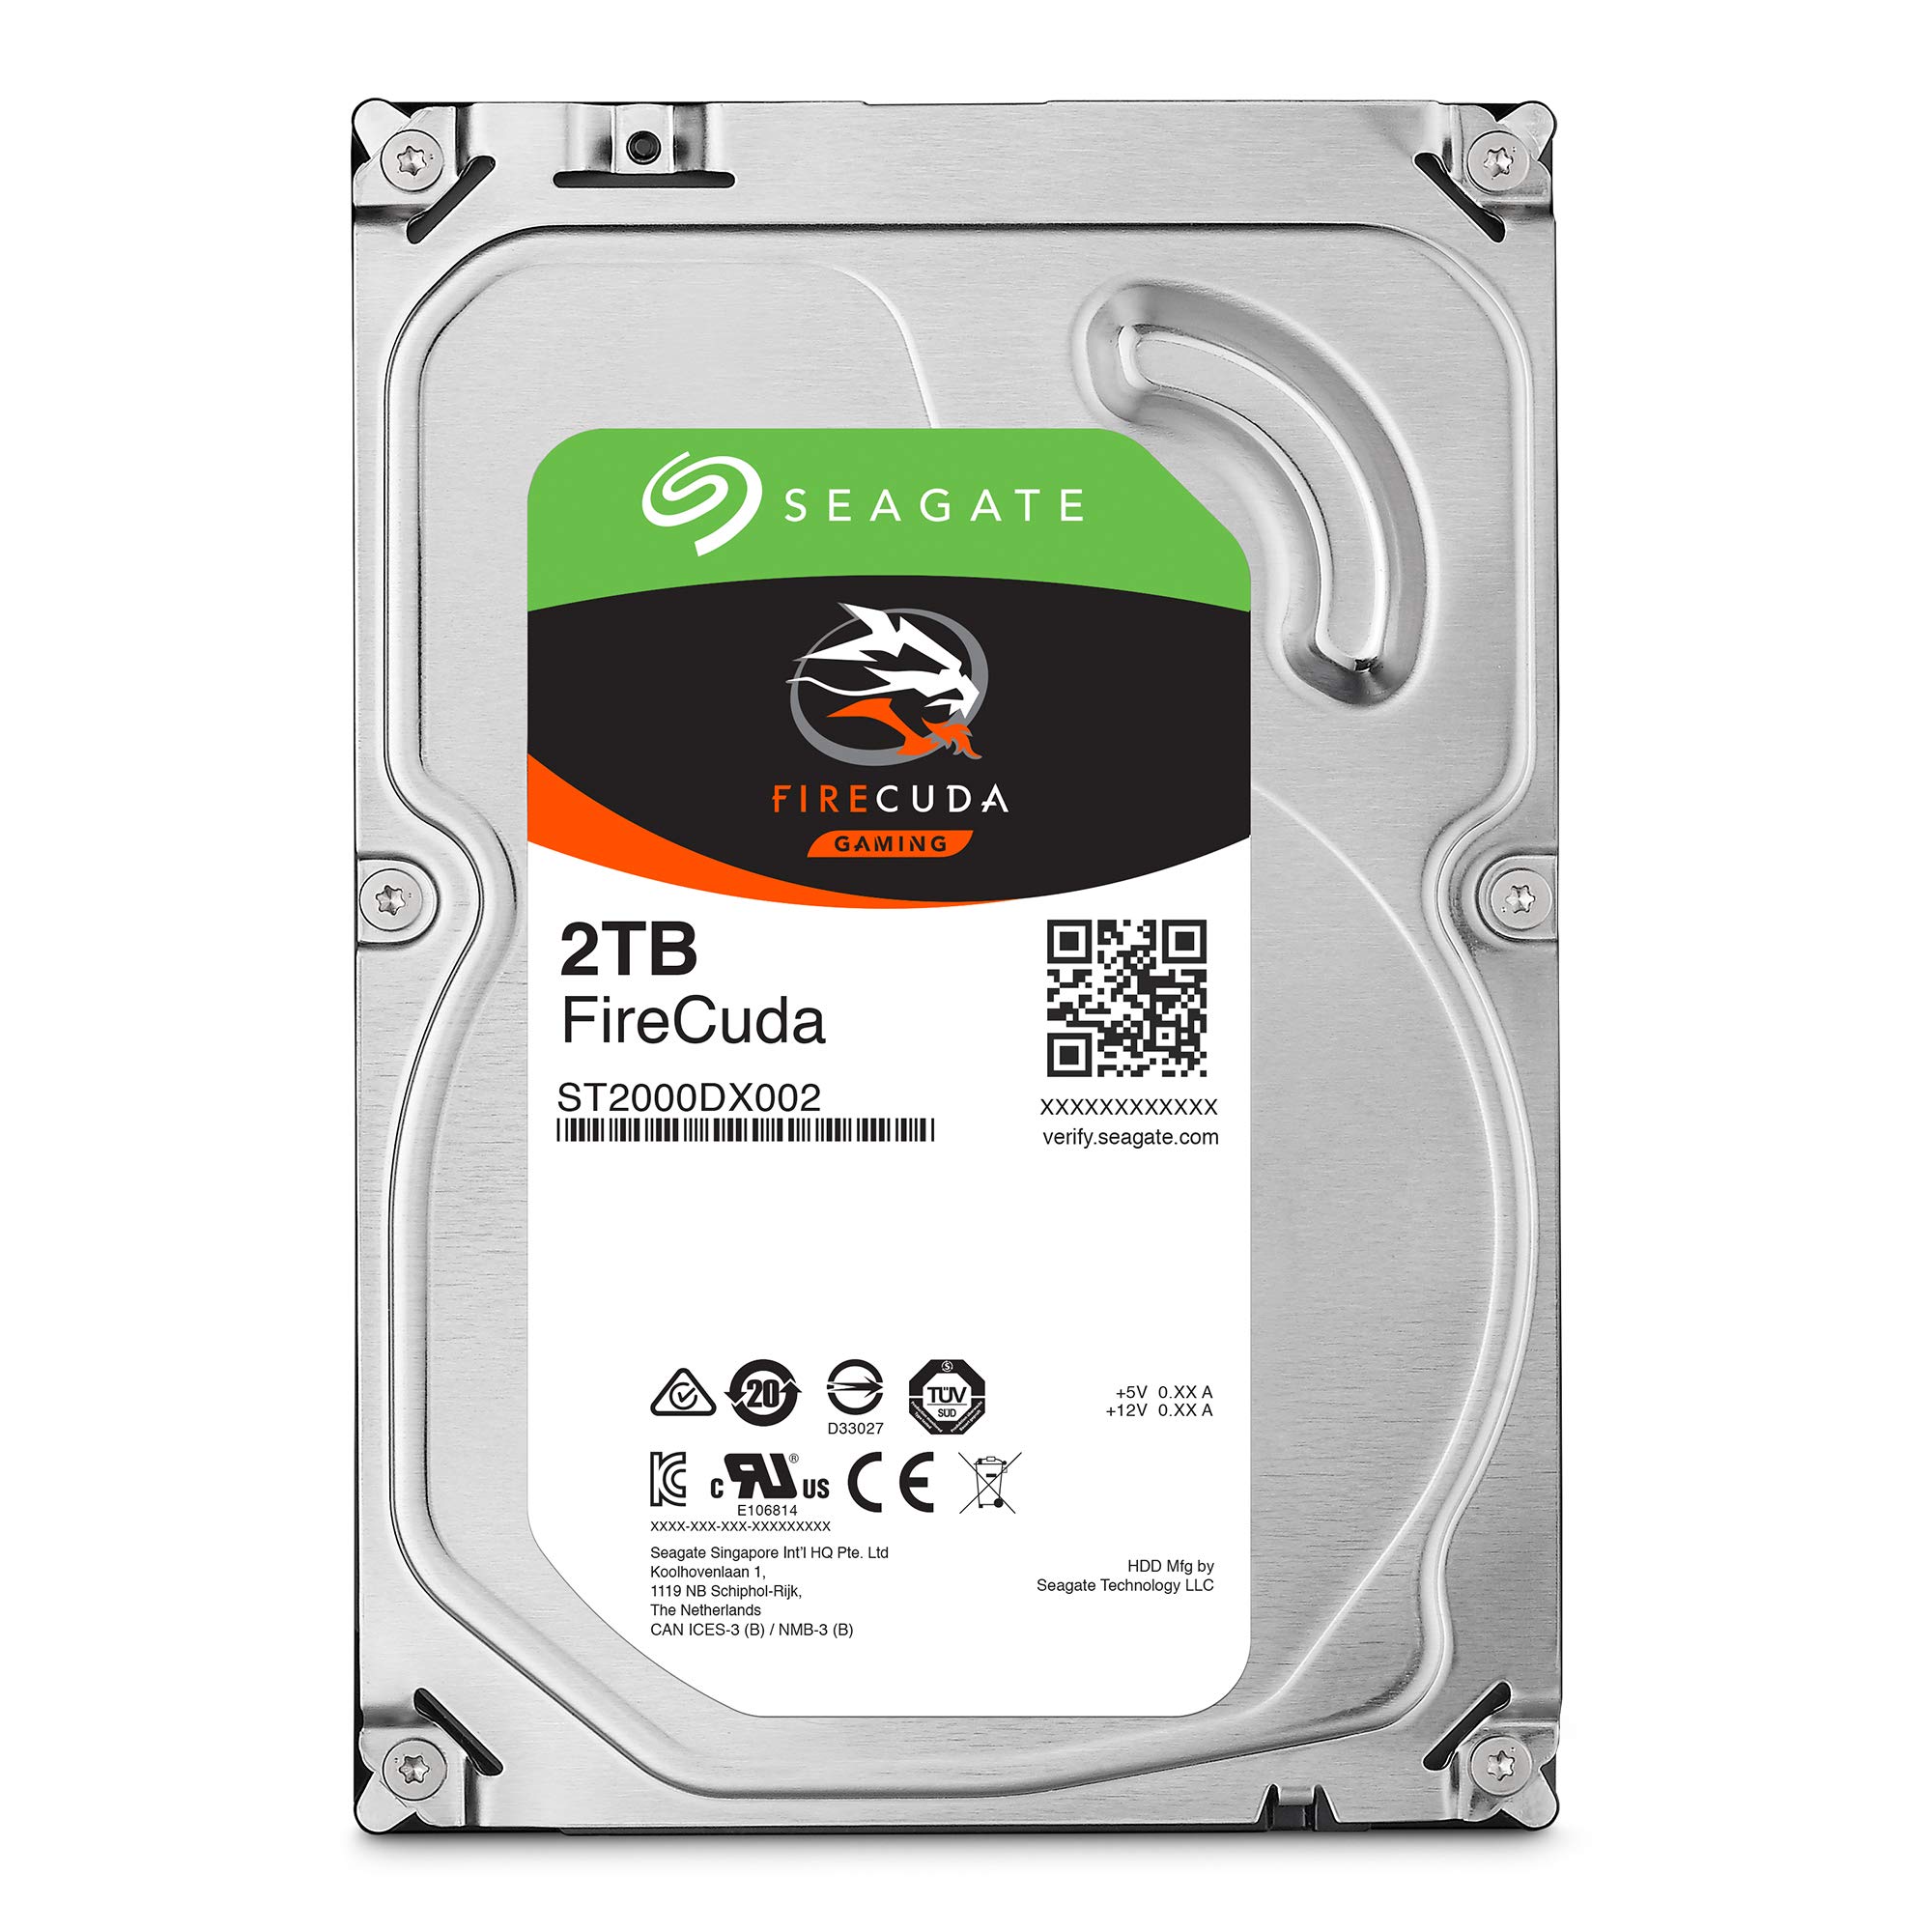 Seagate FireCuda 2TB Solid State Hybrid Drive Performance SSHD – 3.5 Inch SATA 6Gb/s Flash Accelerated for Gaming PC Desktop (ST2000DX002)